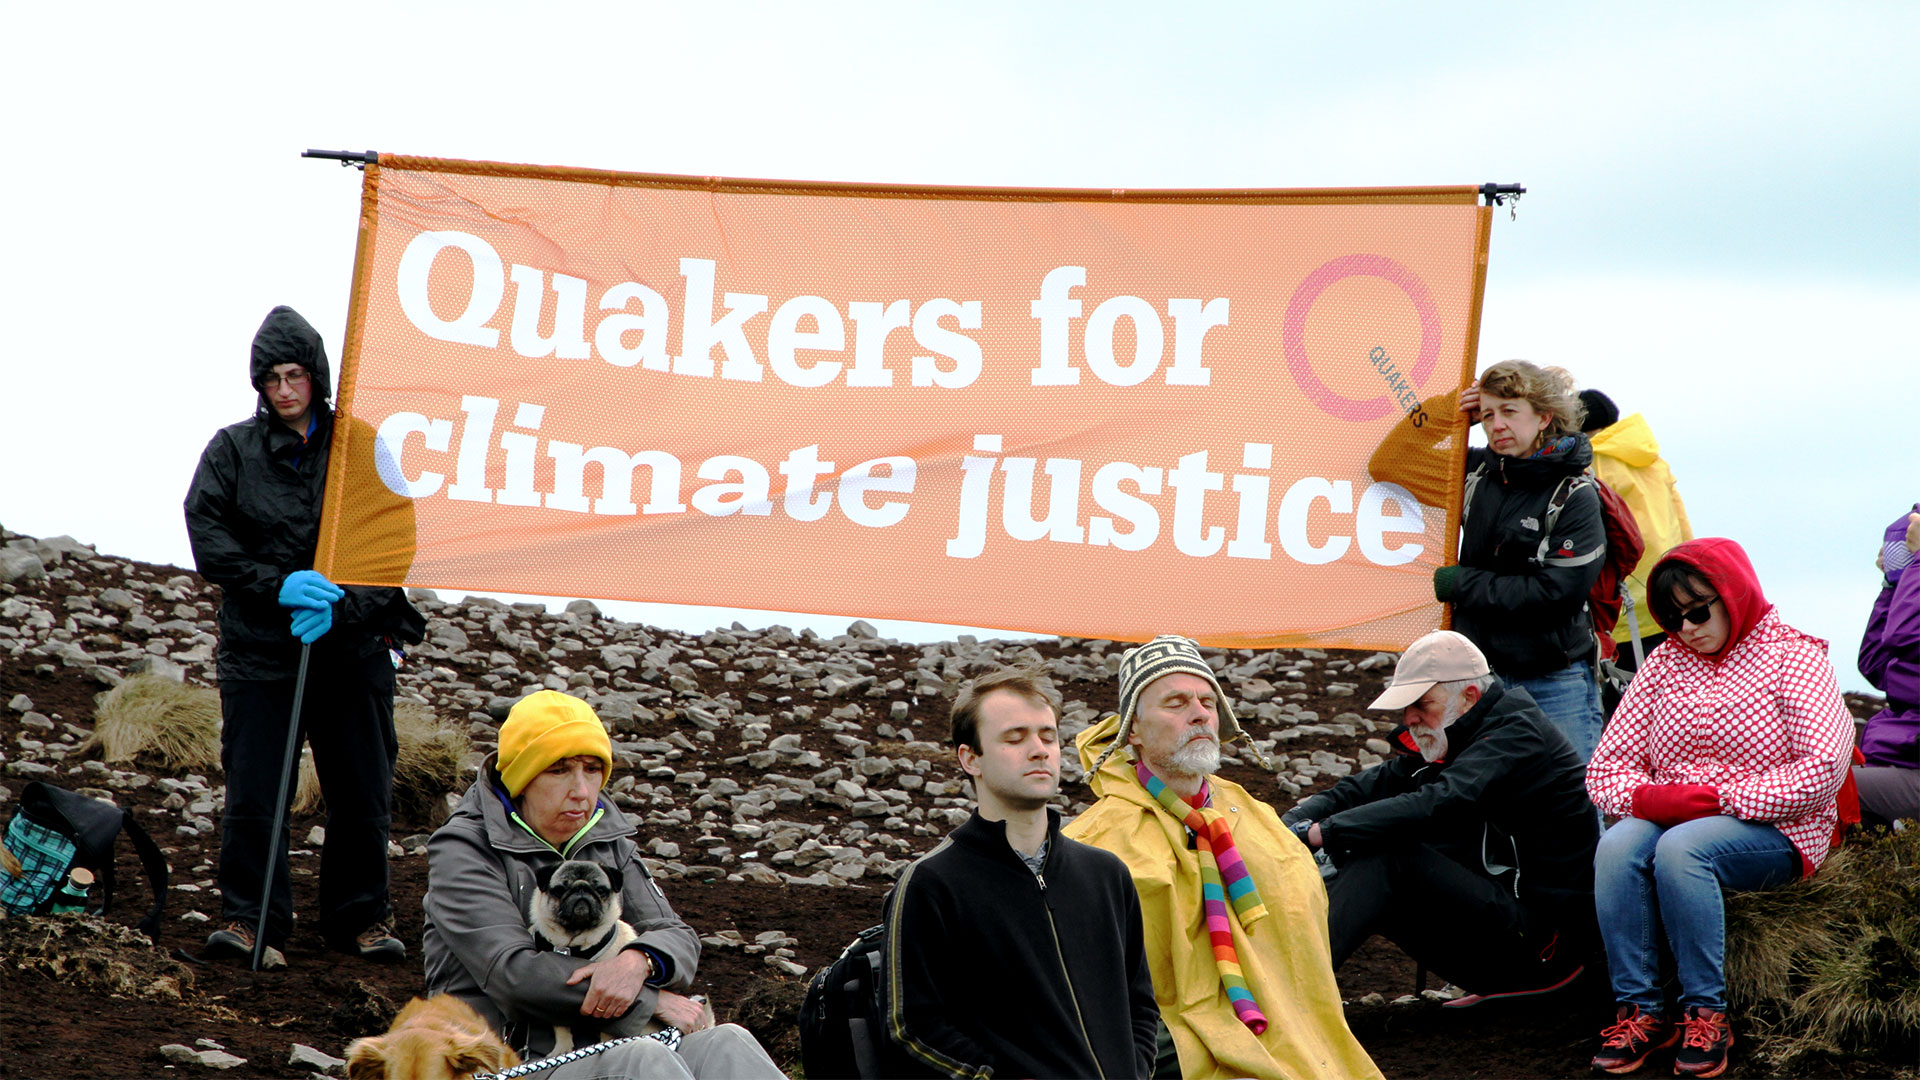 Quakers for climate justice